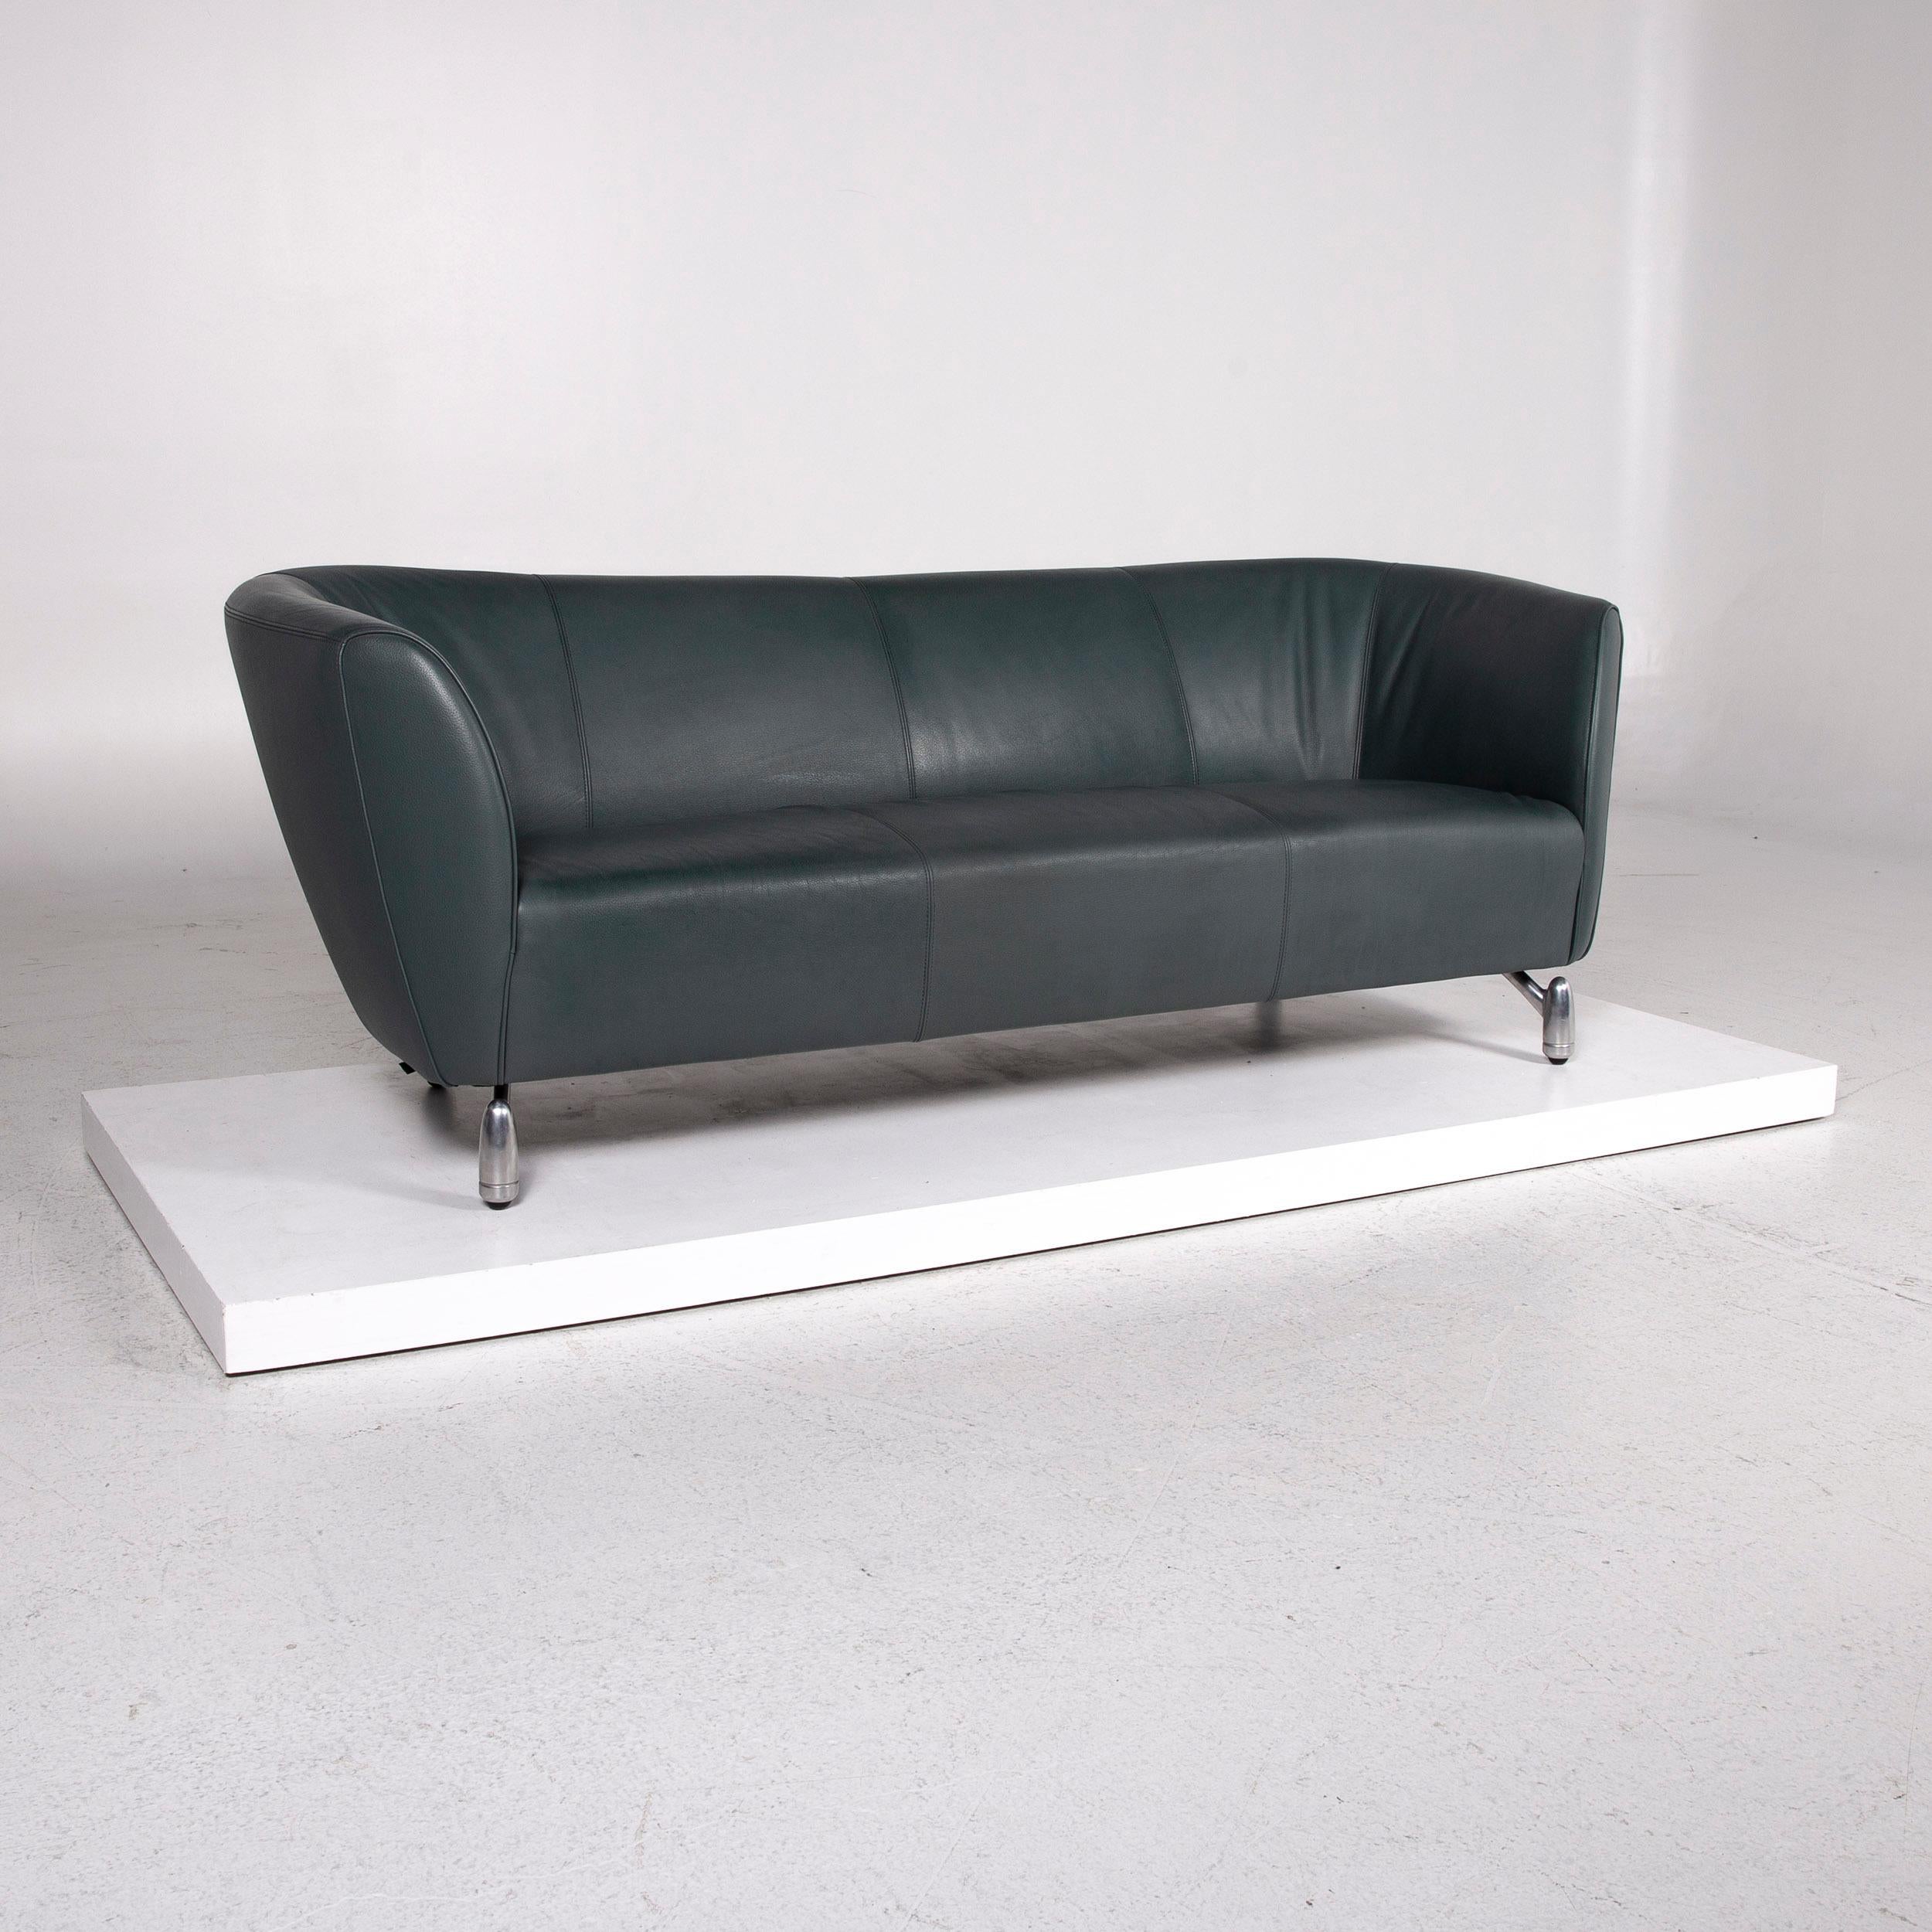 We bring to you a Leolux Pupilla leather sofa green three-seat couch.

 

 Product measurements in centimeters:
 

Depth 87
Width 214
Height 85
Seat-height 43
Rest-height 73
Seat-depth 58
Seat-width 167
Back-height 28.